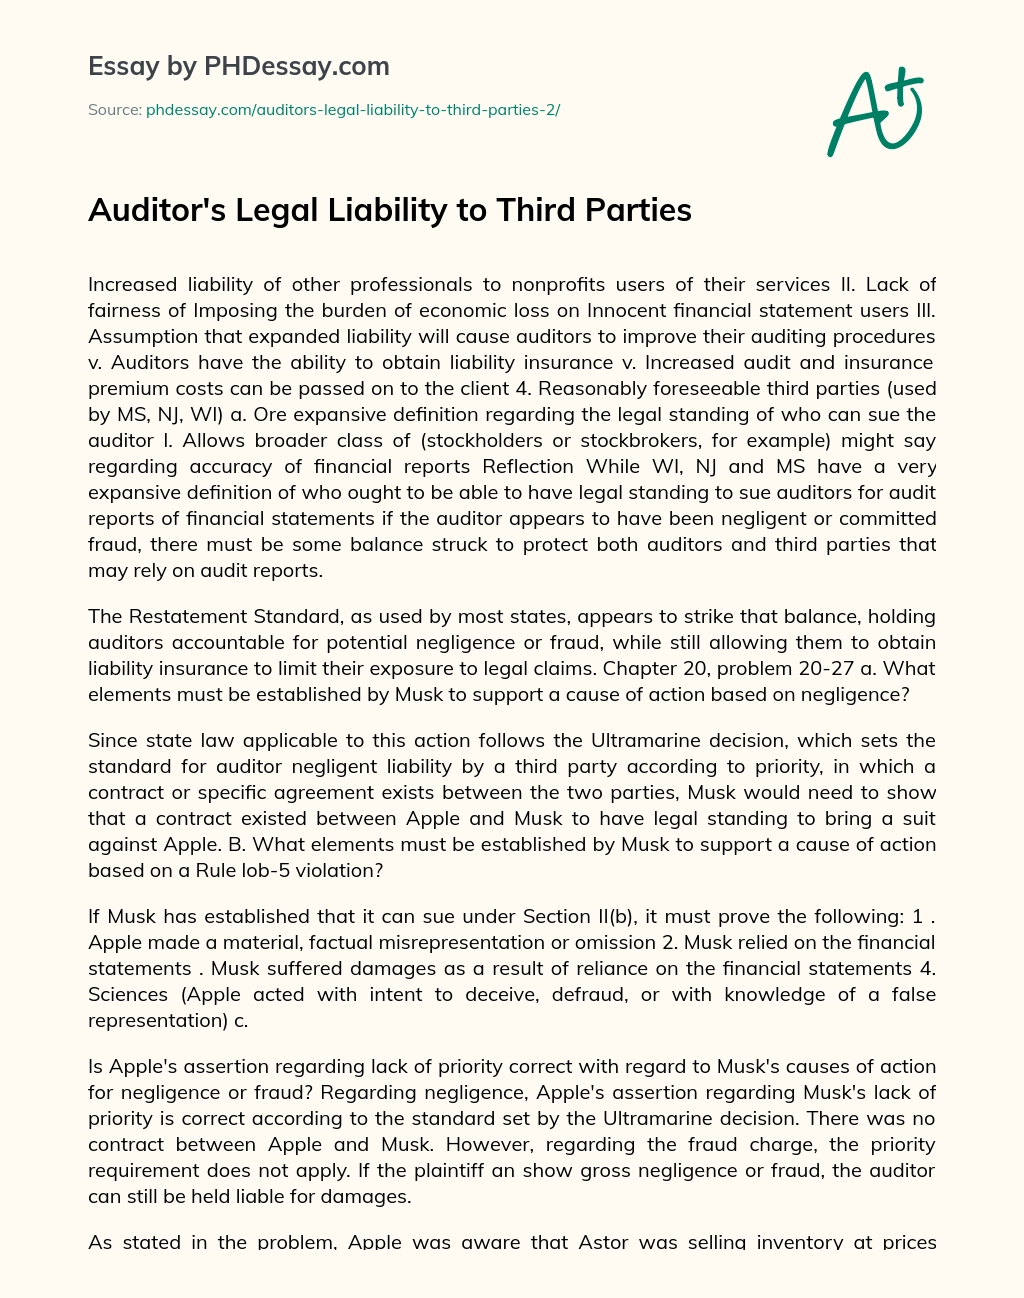 Auditor’s Legal Liability to Third Parties essay